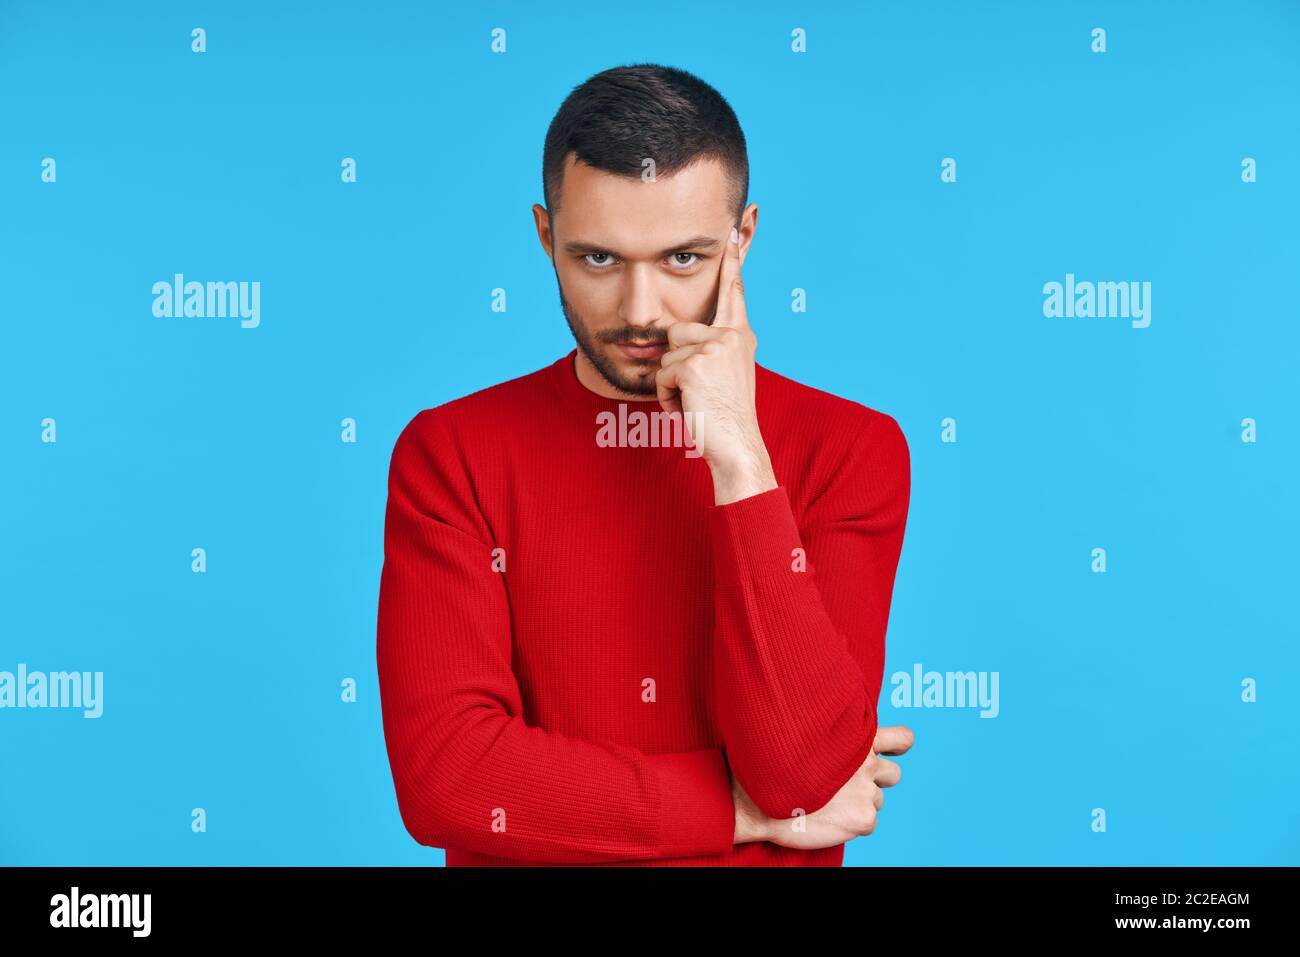 Young thoughtful man thinking and looking to camera with copy space, isolated on blue background Stock Photo